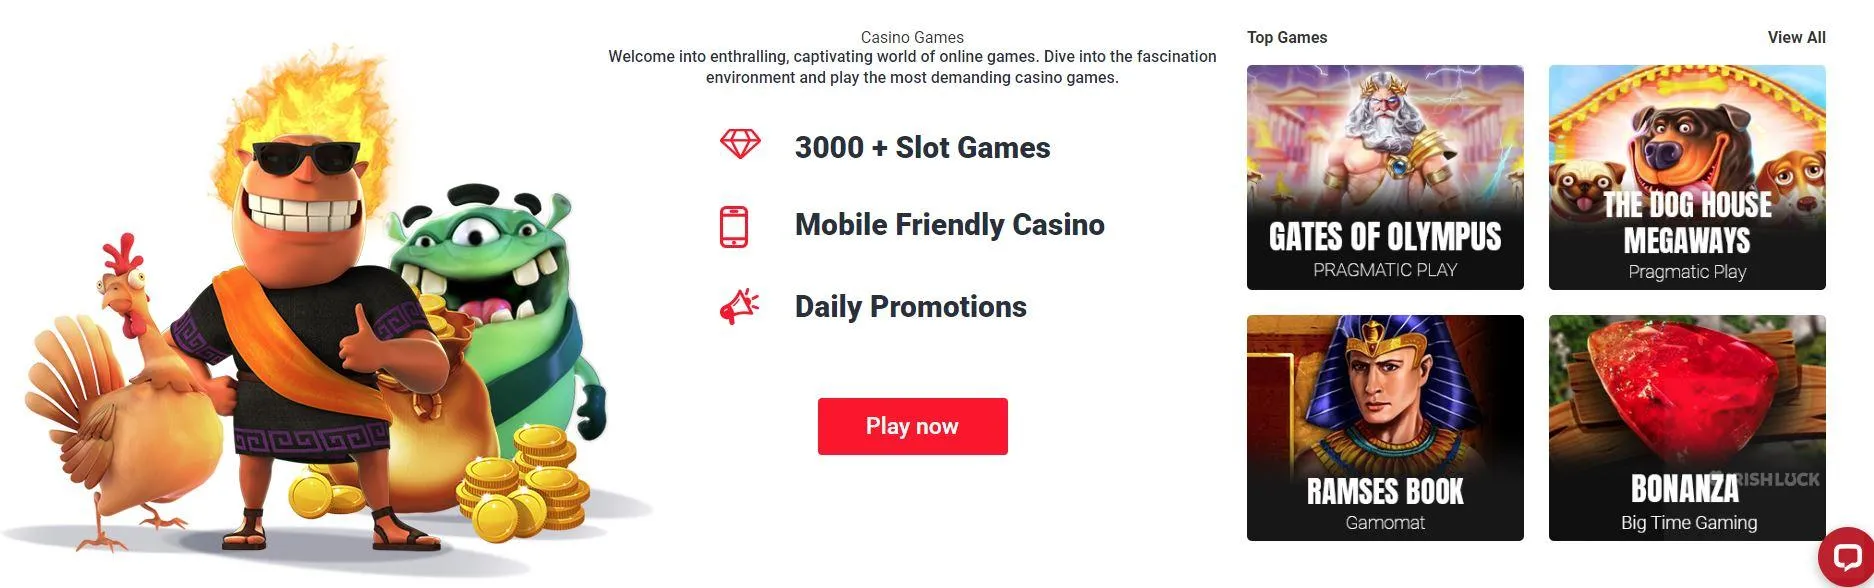 31bet casino what you need to know daily promotions mobile casino irish online casinos mga licence online casino games best online casinos ireland